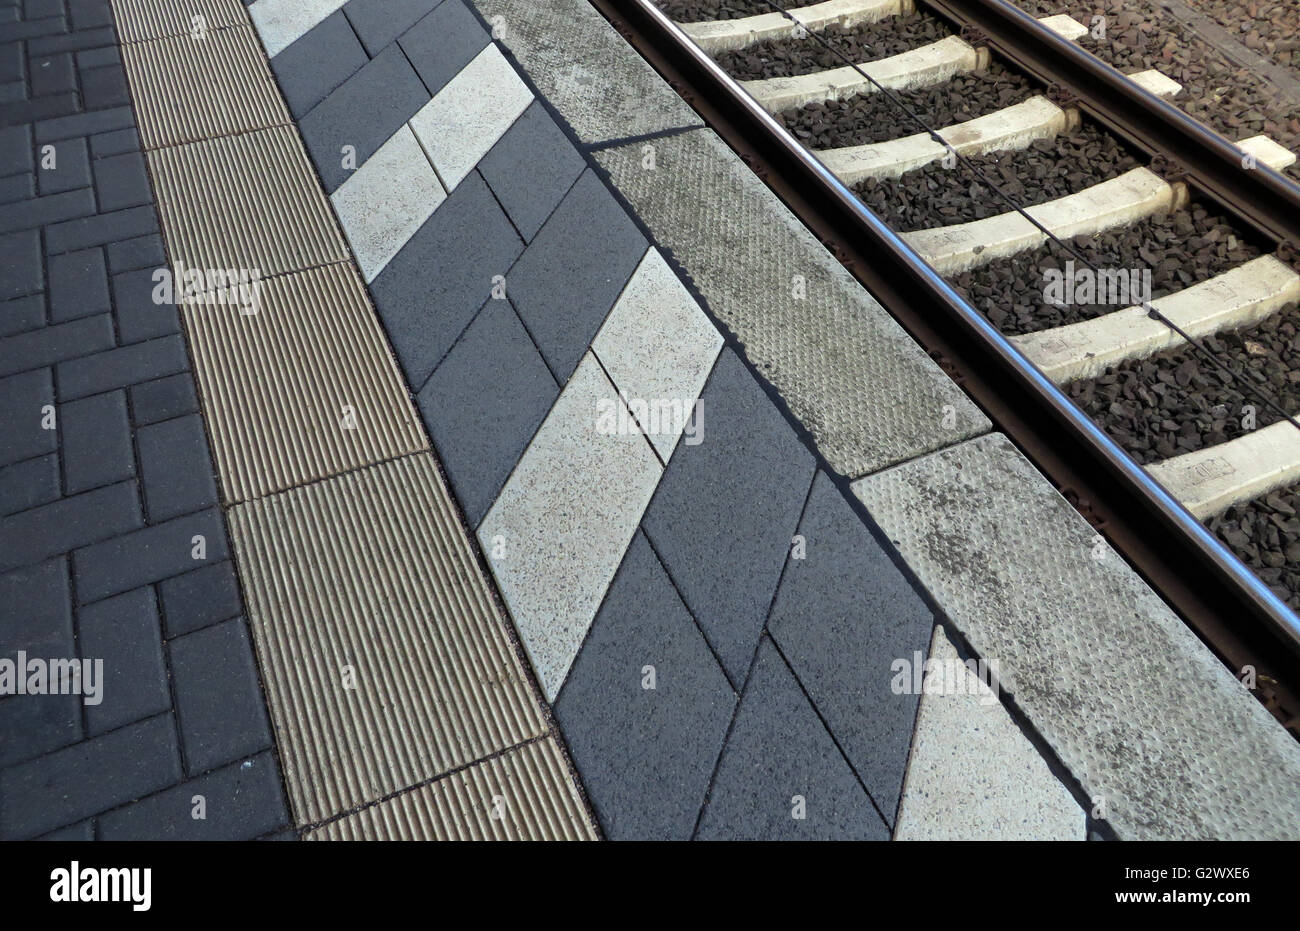 26.07.2015, Ludwigslust, Brandenburg , Germany - Platform edge with the Blind and track. 00S150726D900CAROEX.JPG - NOT for SALE in G E R M A N Y, A U S T R I A, S W I T Z E R L A N D [MODEL RELEASE: NOT APPLICABLE, PROPERTY RELEASE: NO, (c) caro photo agency / Sorge, http://www.caro-images.com, info@carofoto.pl - Any use of this picture is subject to royalty!] Stock Photo